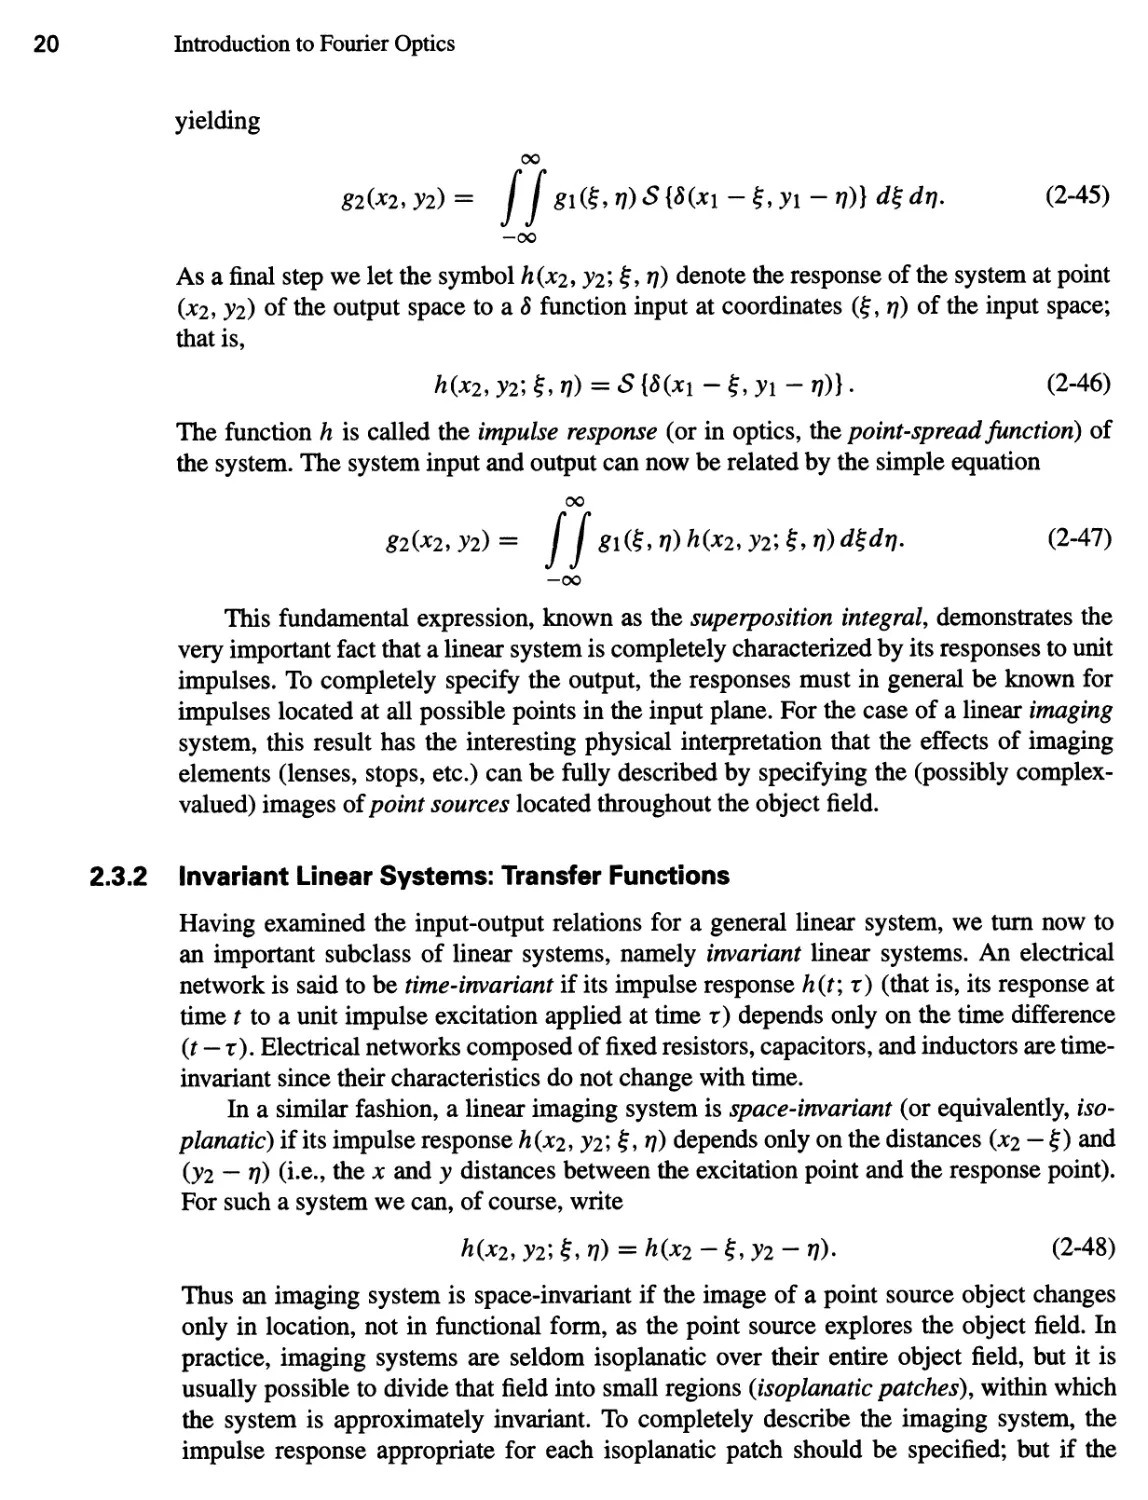 2.3.2 Invariant Linear Systems: Transfer Functions 20